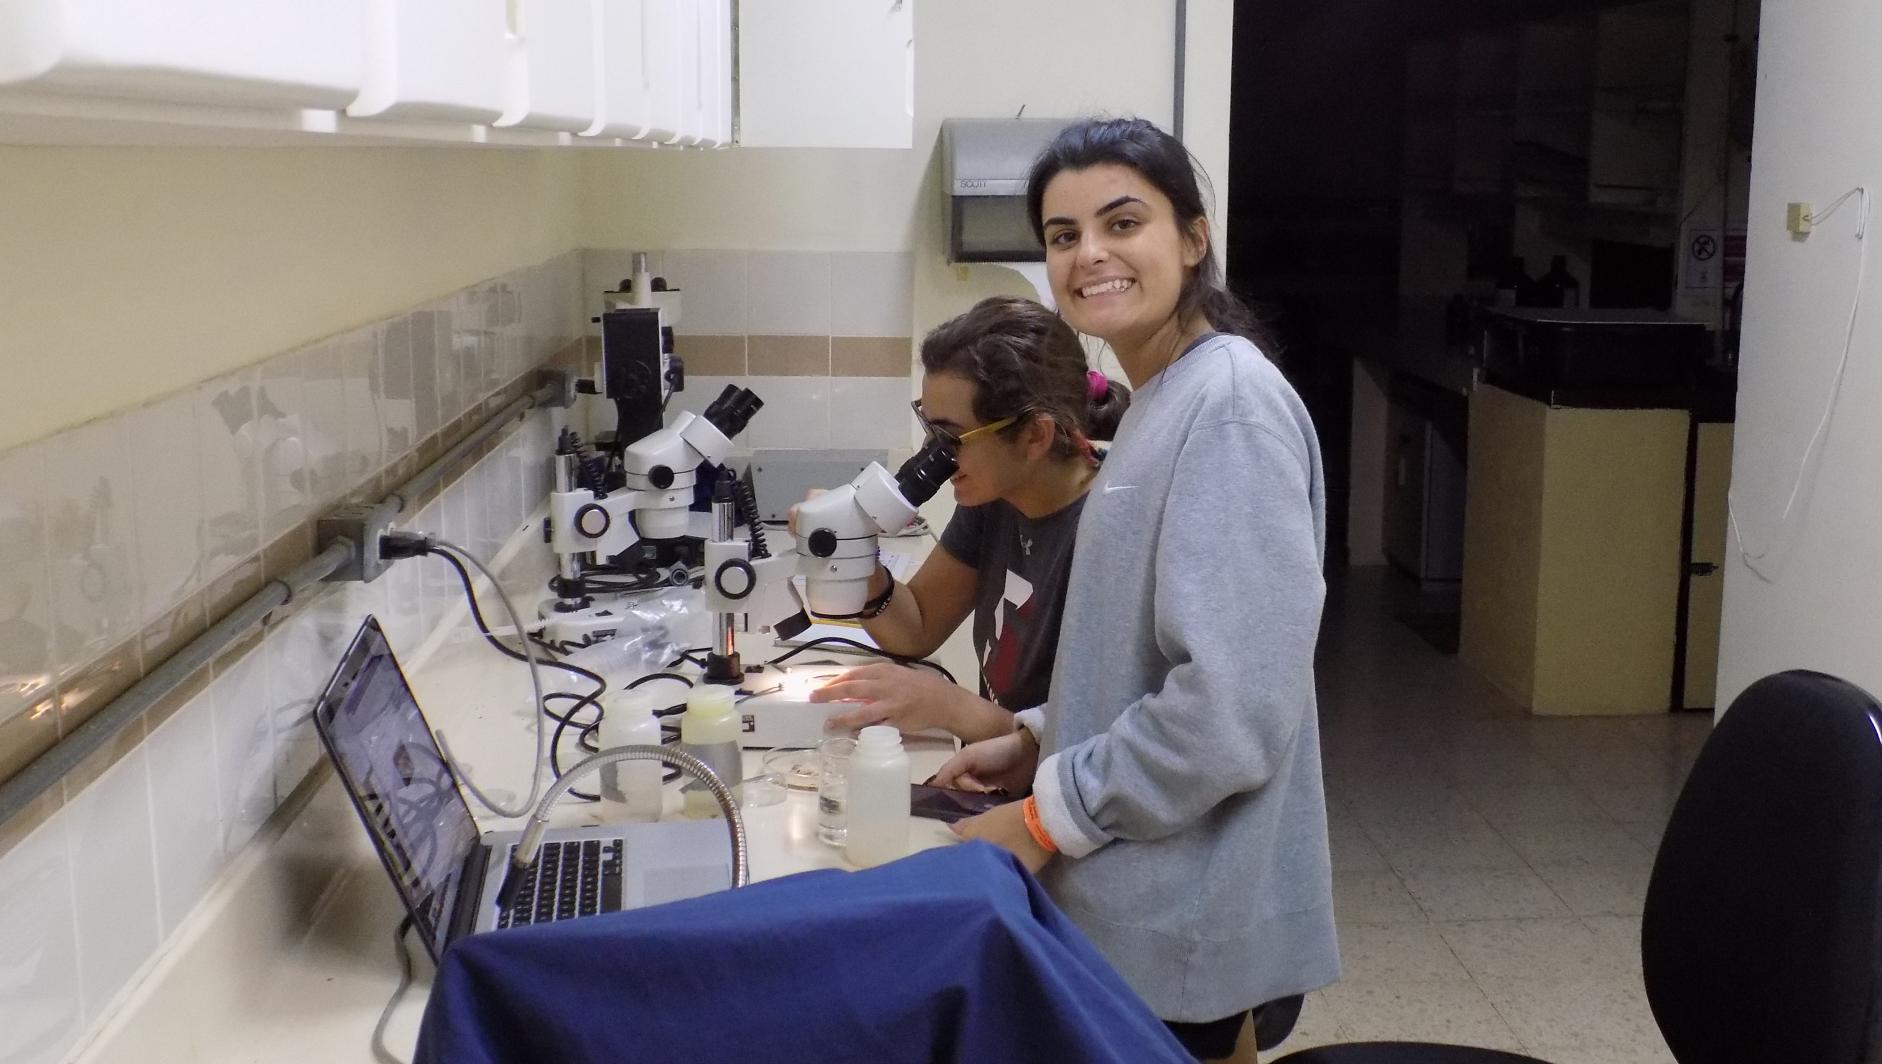 Students collecting in a lab